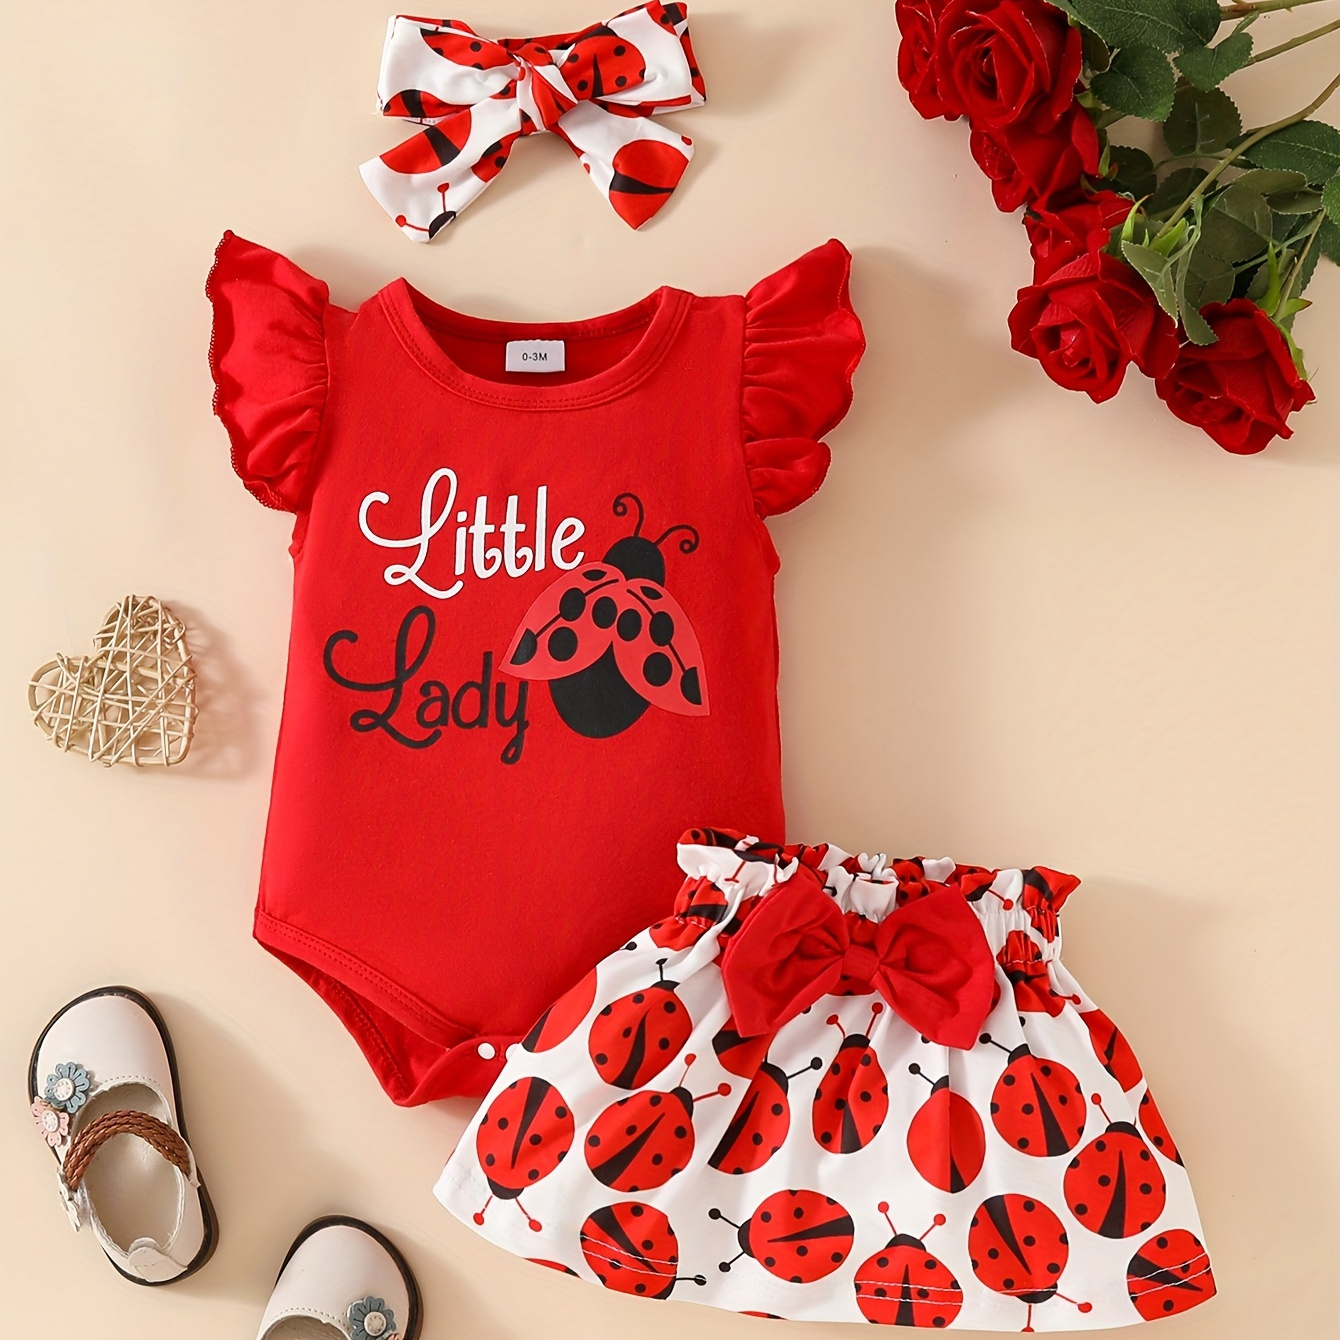 

Baby's "little Lady" Print 2pcs Casual Summer Outfit, Cap Sleeve Onesie & Headband & Ladybug Full Print Skirt Set, Toddler & Infant Girl's Clothes For Daily/holiday, As Gift